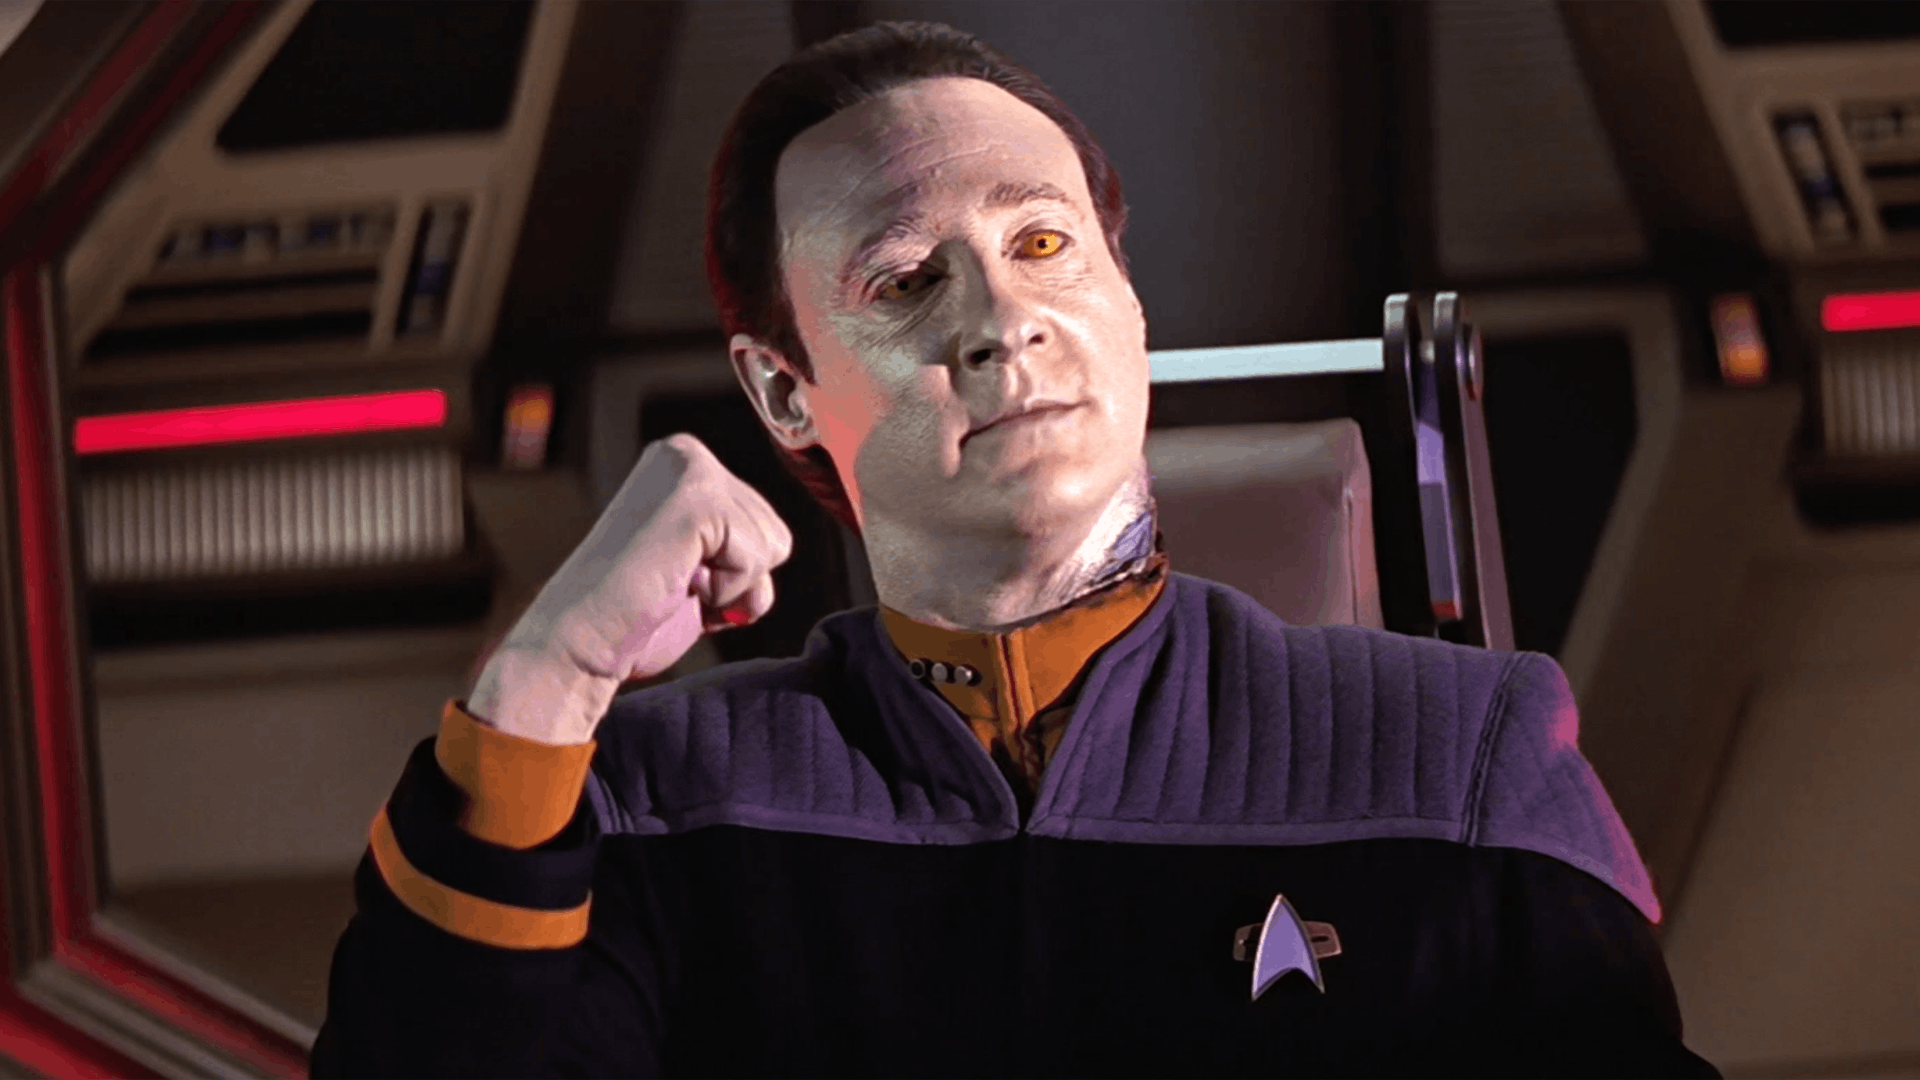 Data singing, with his fist in the air in Star Trek: Insurrection